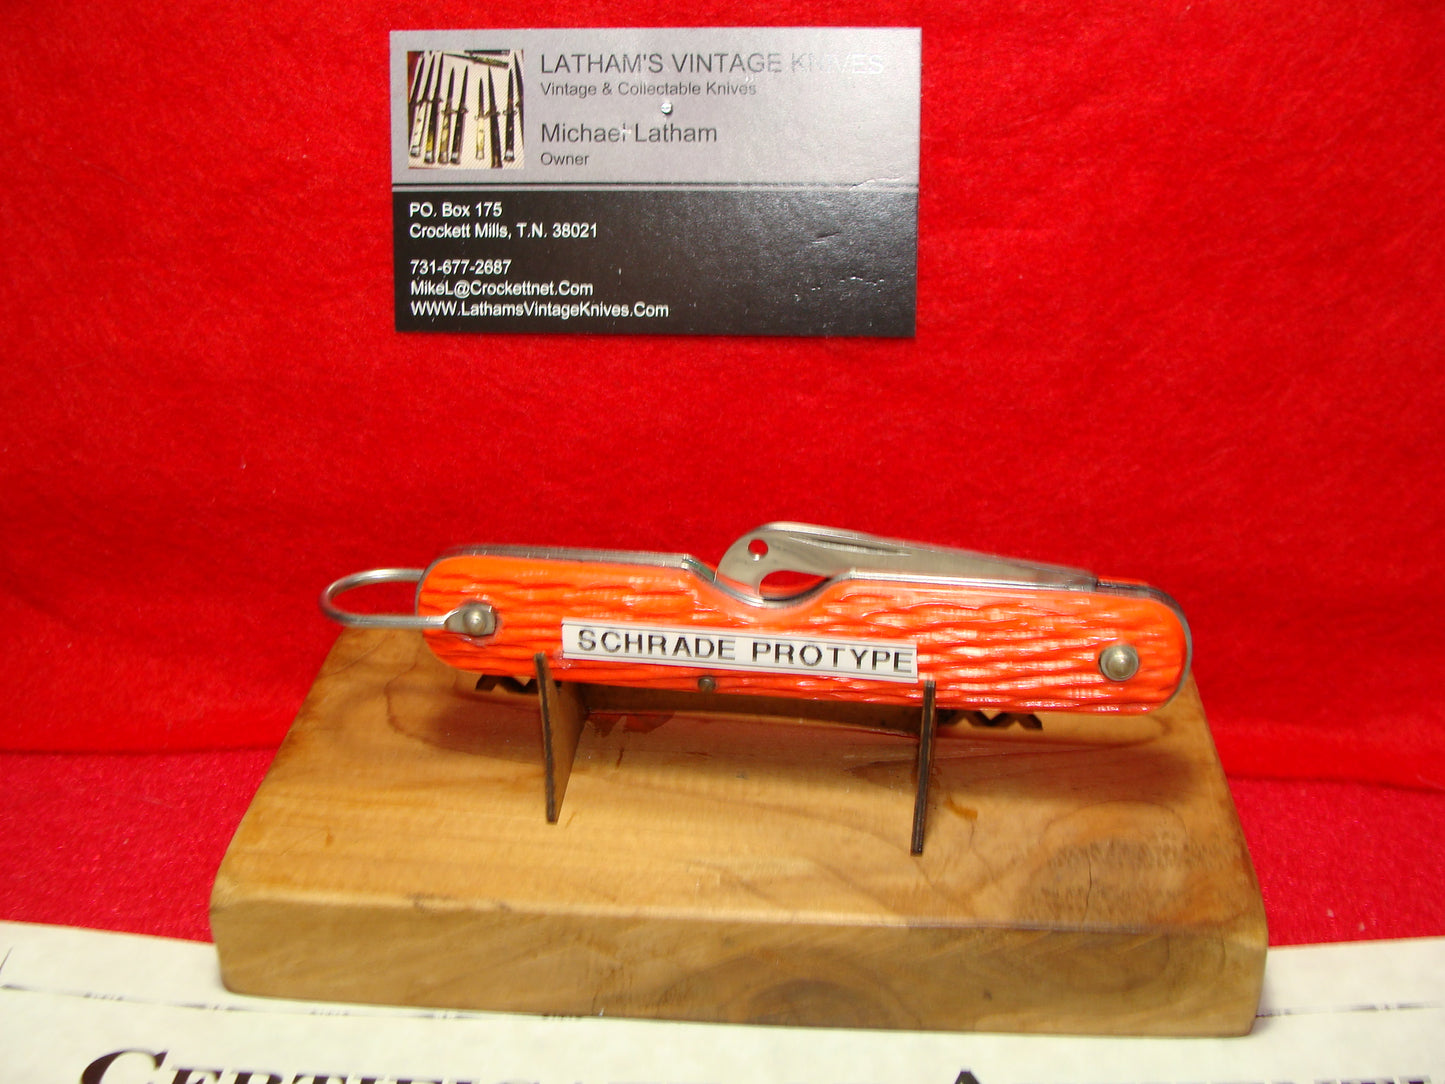 SCHRADE WALDEN NY 1946-76 PROTOTYPE EASY OPENER FOLDING PARATROOPER SHROUD CUTTER MILITARY NON AUTOMATIC KNIFE ORANGE DELRIN HANDLES PART OF THE SCHRADE FACTORY COLLECTION